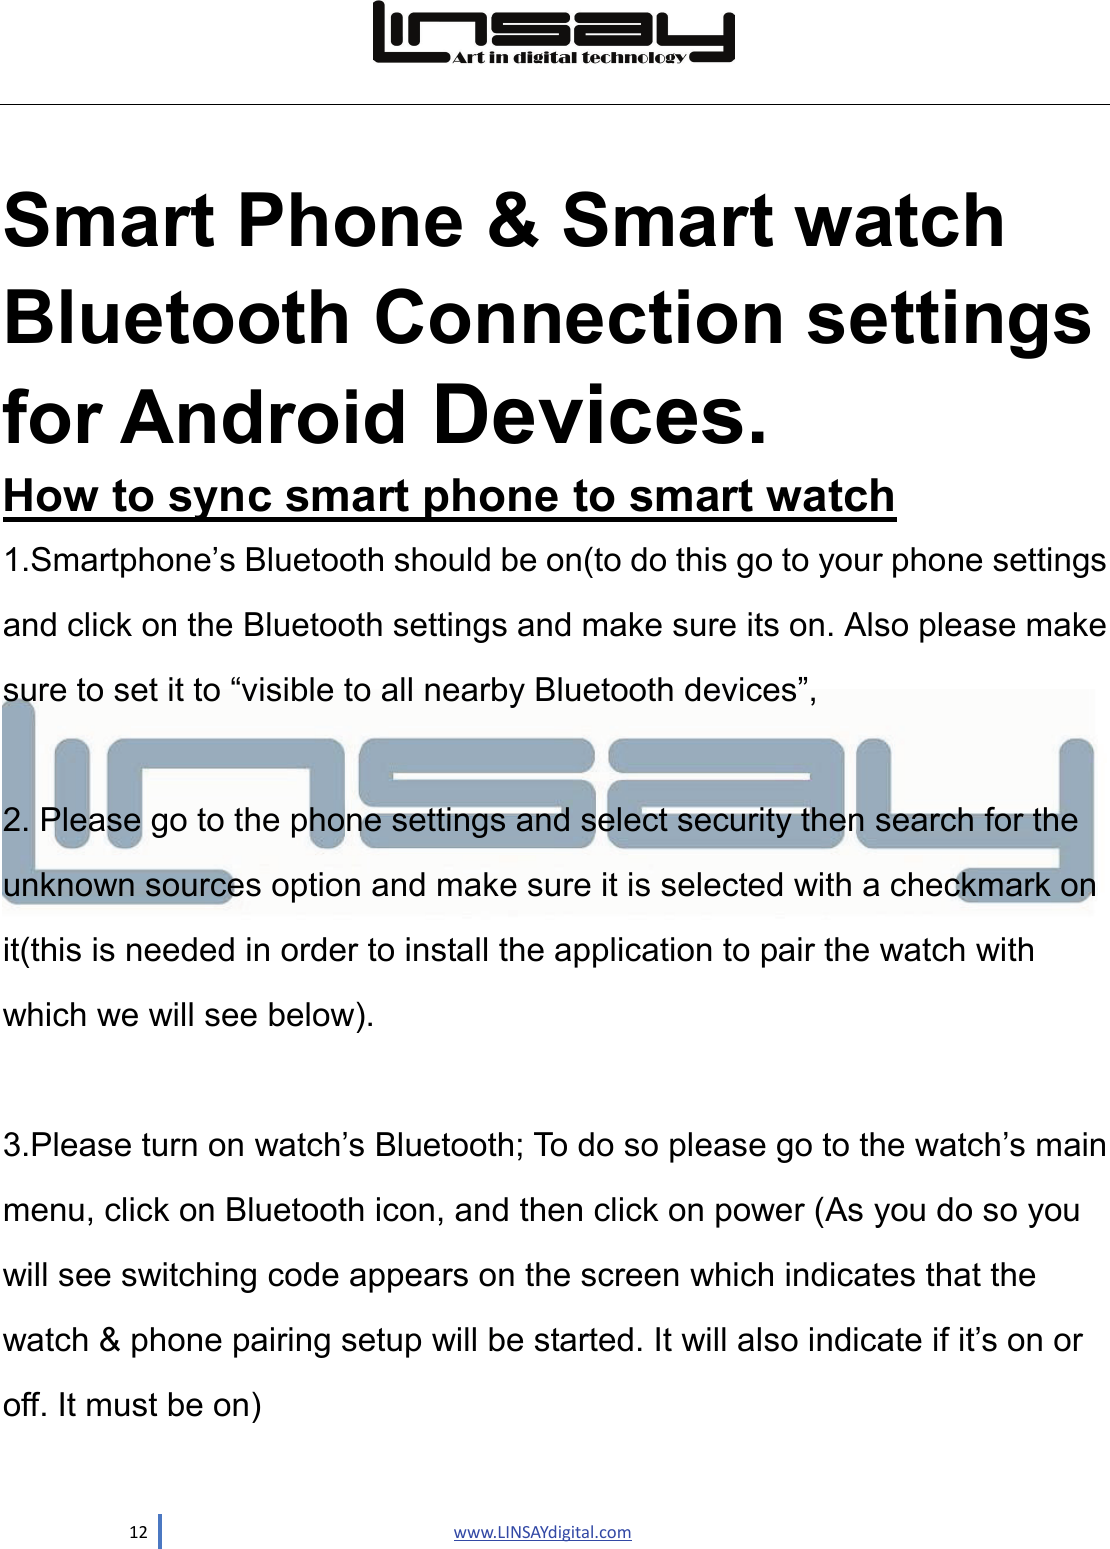  12                               www.LINSAYdigital.com   Smart Phone &amp; Smart watch Bluetooth Connection settings for Android Devices. How to sync smart phone to smart watch 1.Smartphone’s Bluetooth should be on(to do this go to your phone settings and click on the Bluetooth settings and make sure its on. Also please make sure to set it to “visible to all nearby Bluetooth devices”,    2. Please go to the phone settings and select security then search for the unknown sources option and make sure it is selected with a checkmark on it(this is needed in order to install the application to pair the watch with which we will see below).  3.Please turn on watch’s Bluetooth; To do so please go to the watch’s main menu, click on Bluetooth icon, and then click on power (As you do so you will see switching code appears on the screen which indicates that the watch &amp; phone pairing setup will be started. It will also indicate if it’s on or off. It must be on)  